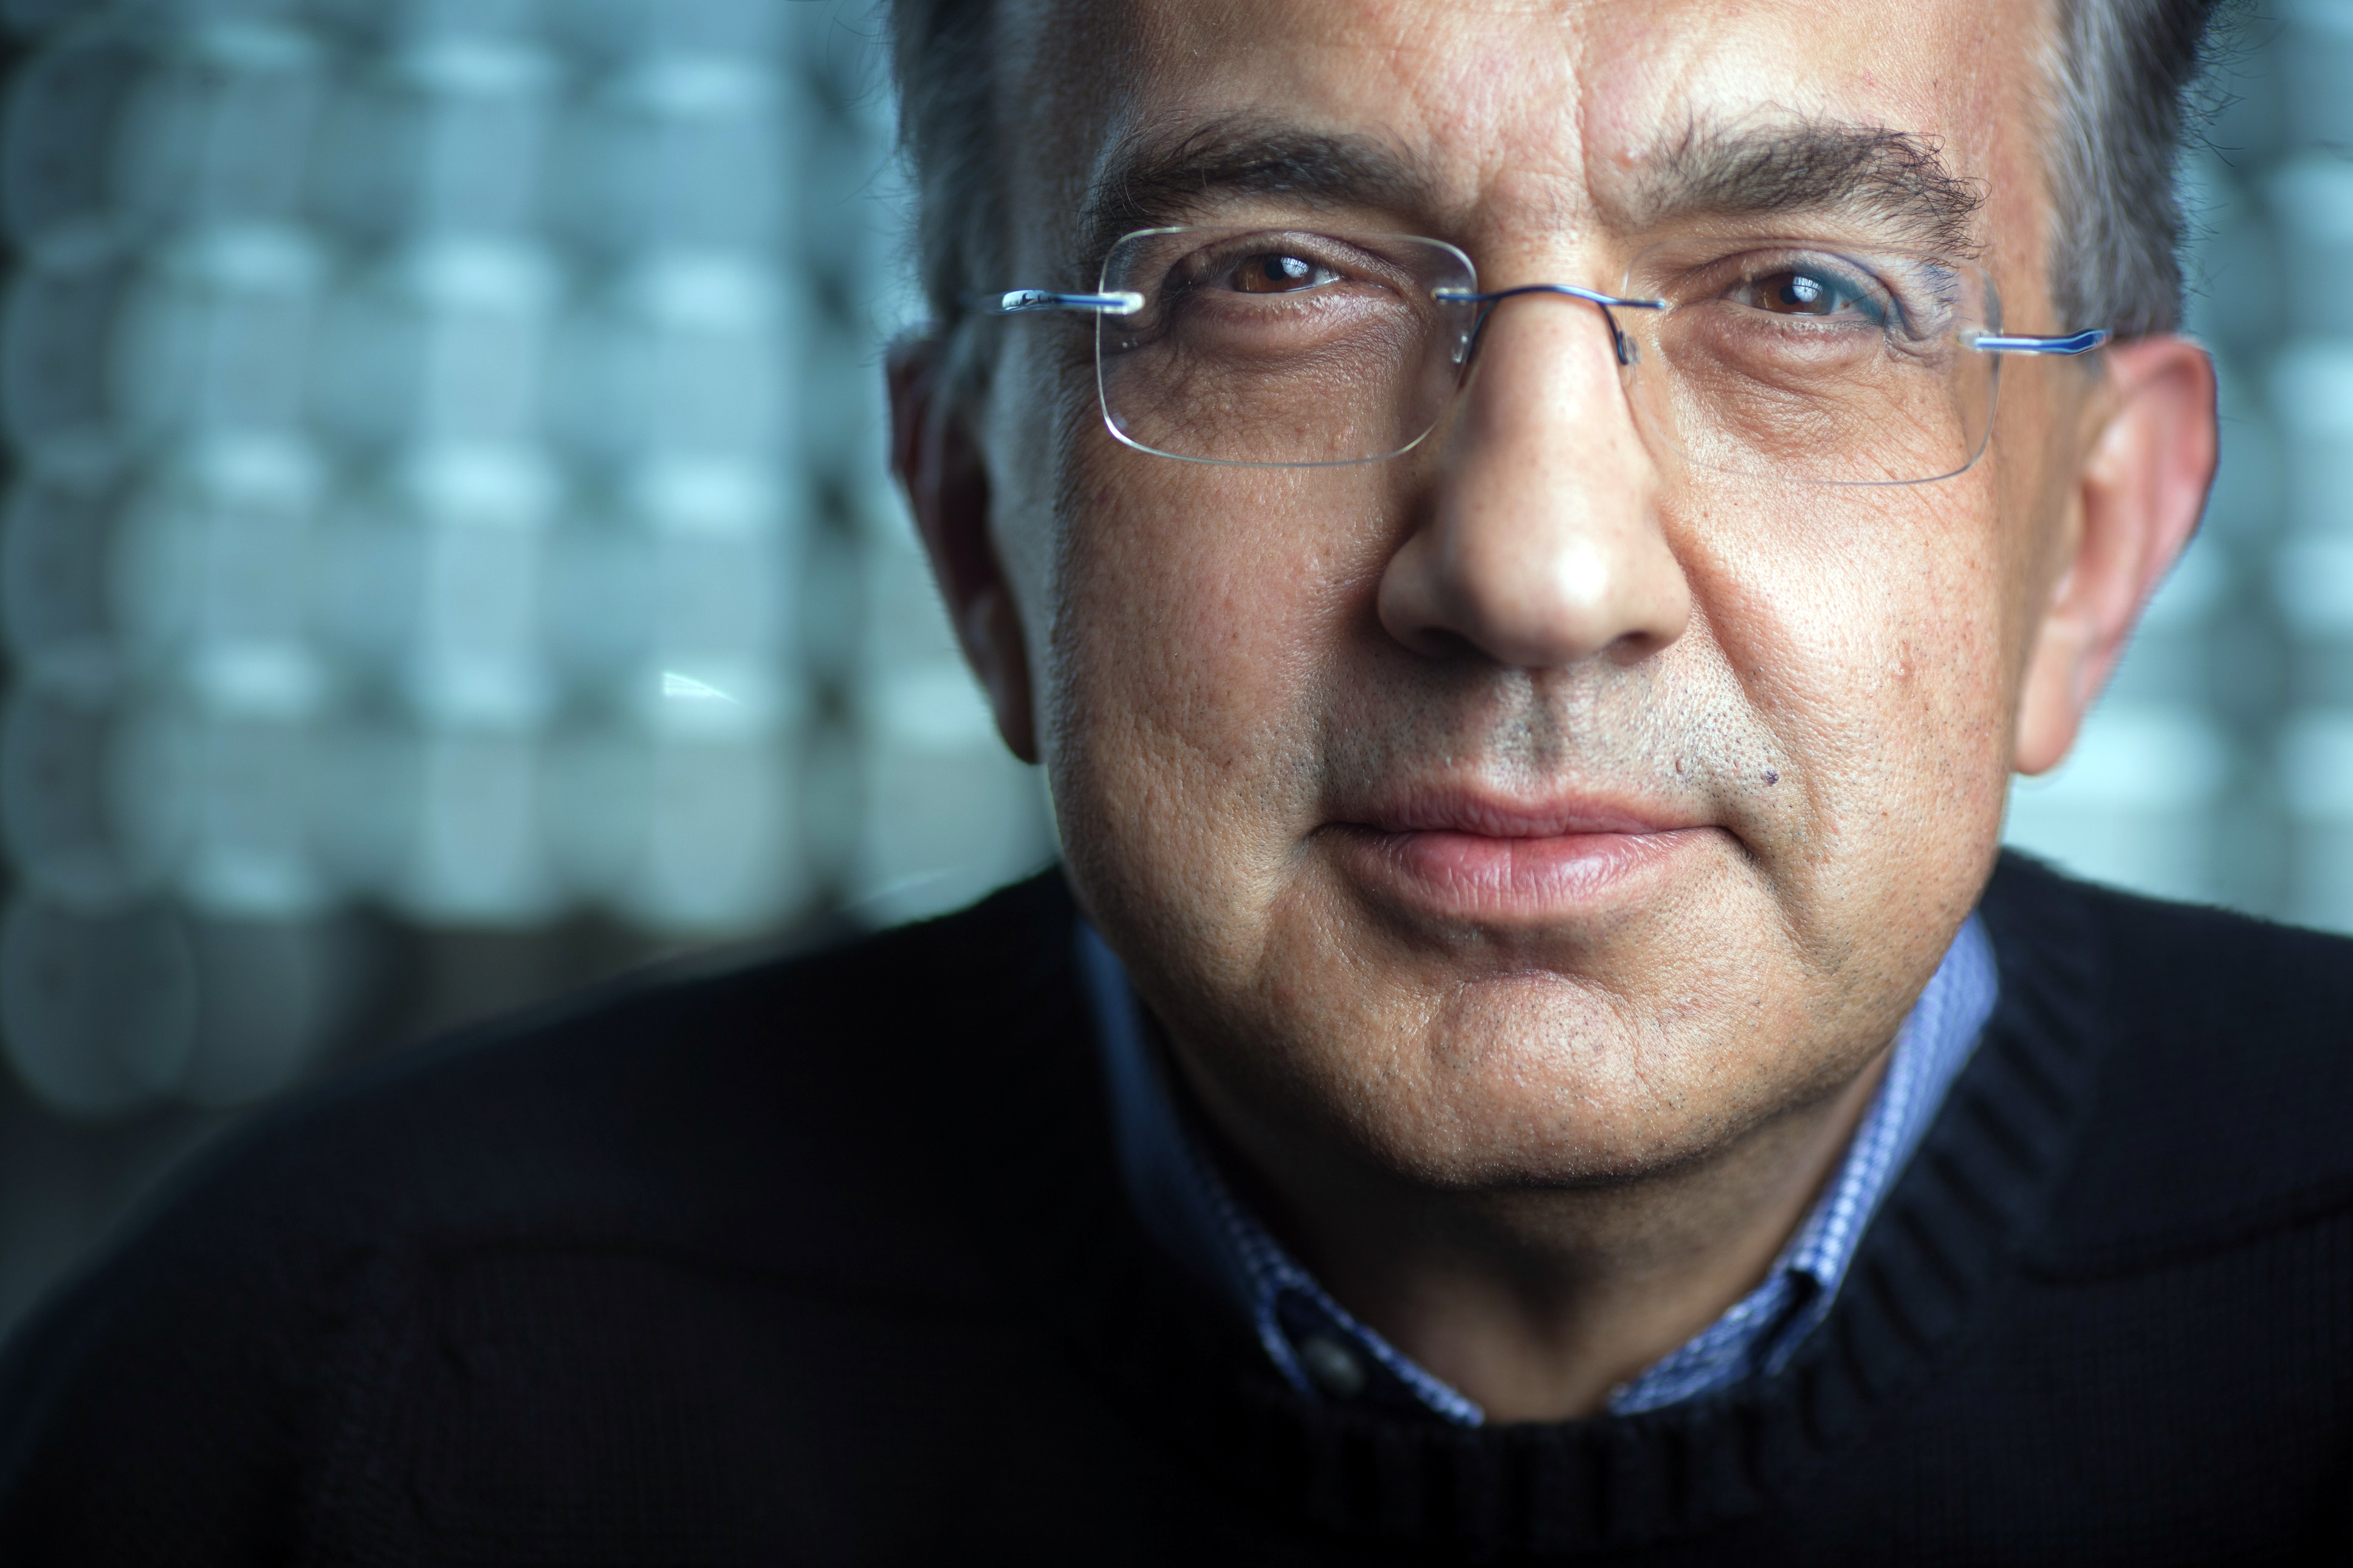 Three challenges impacting FCA and the industry, post-Marchionne